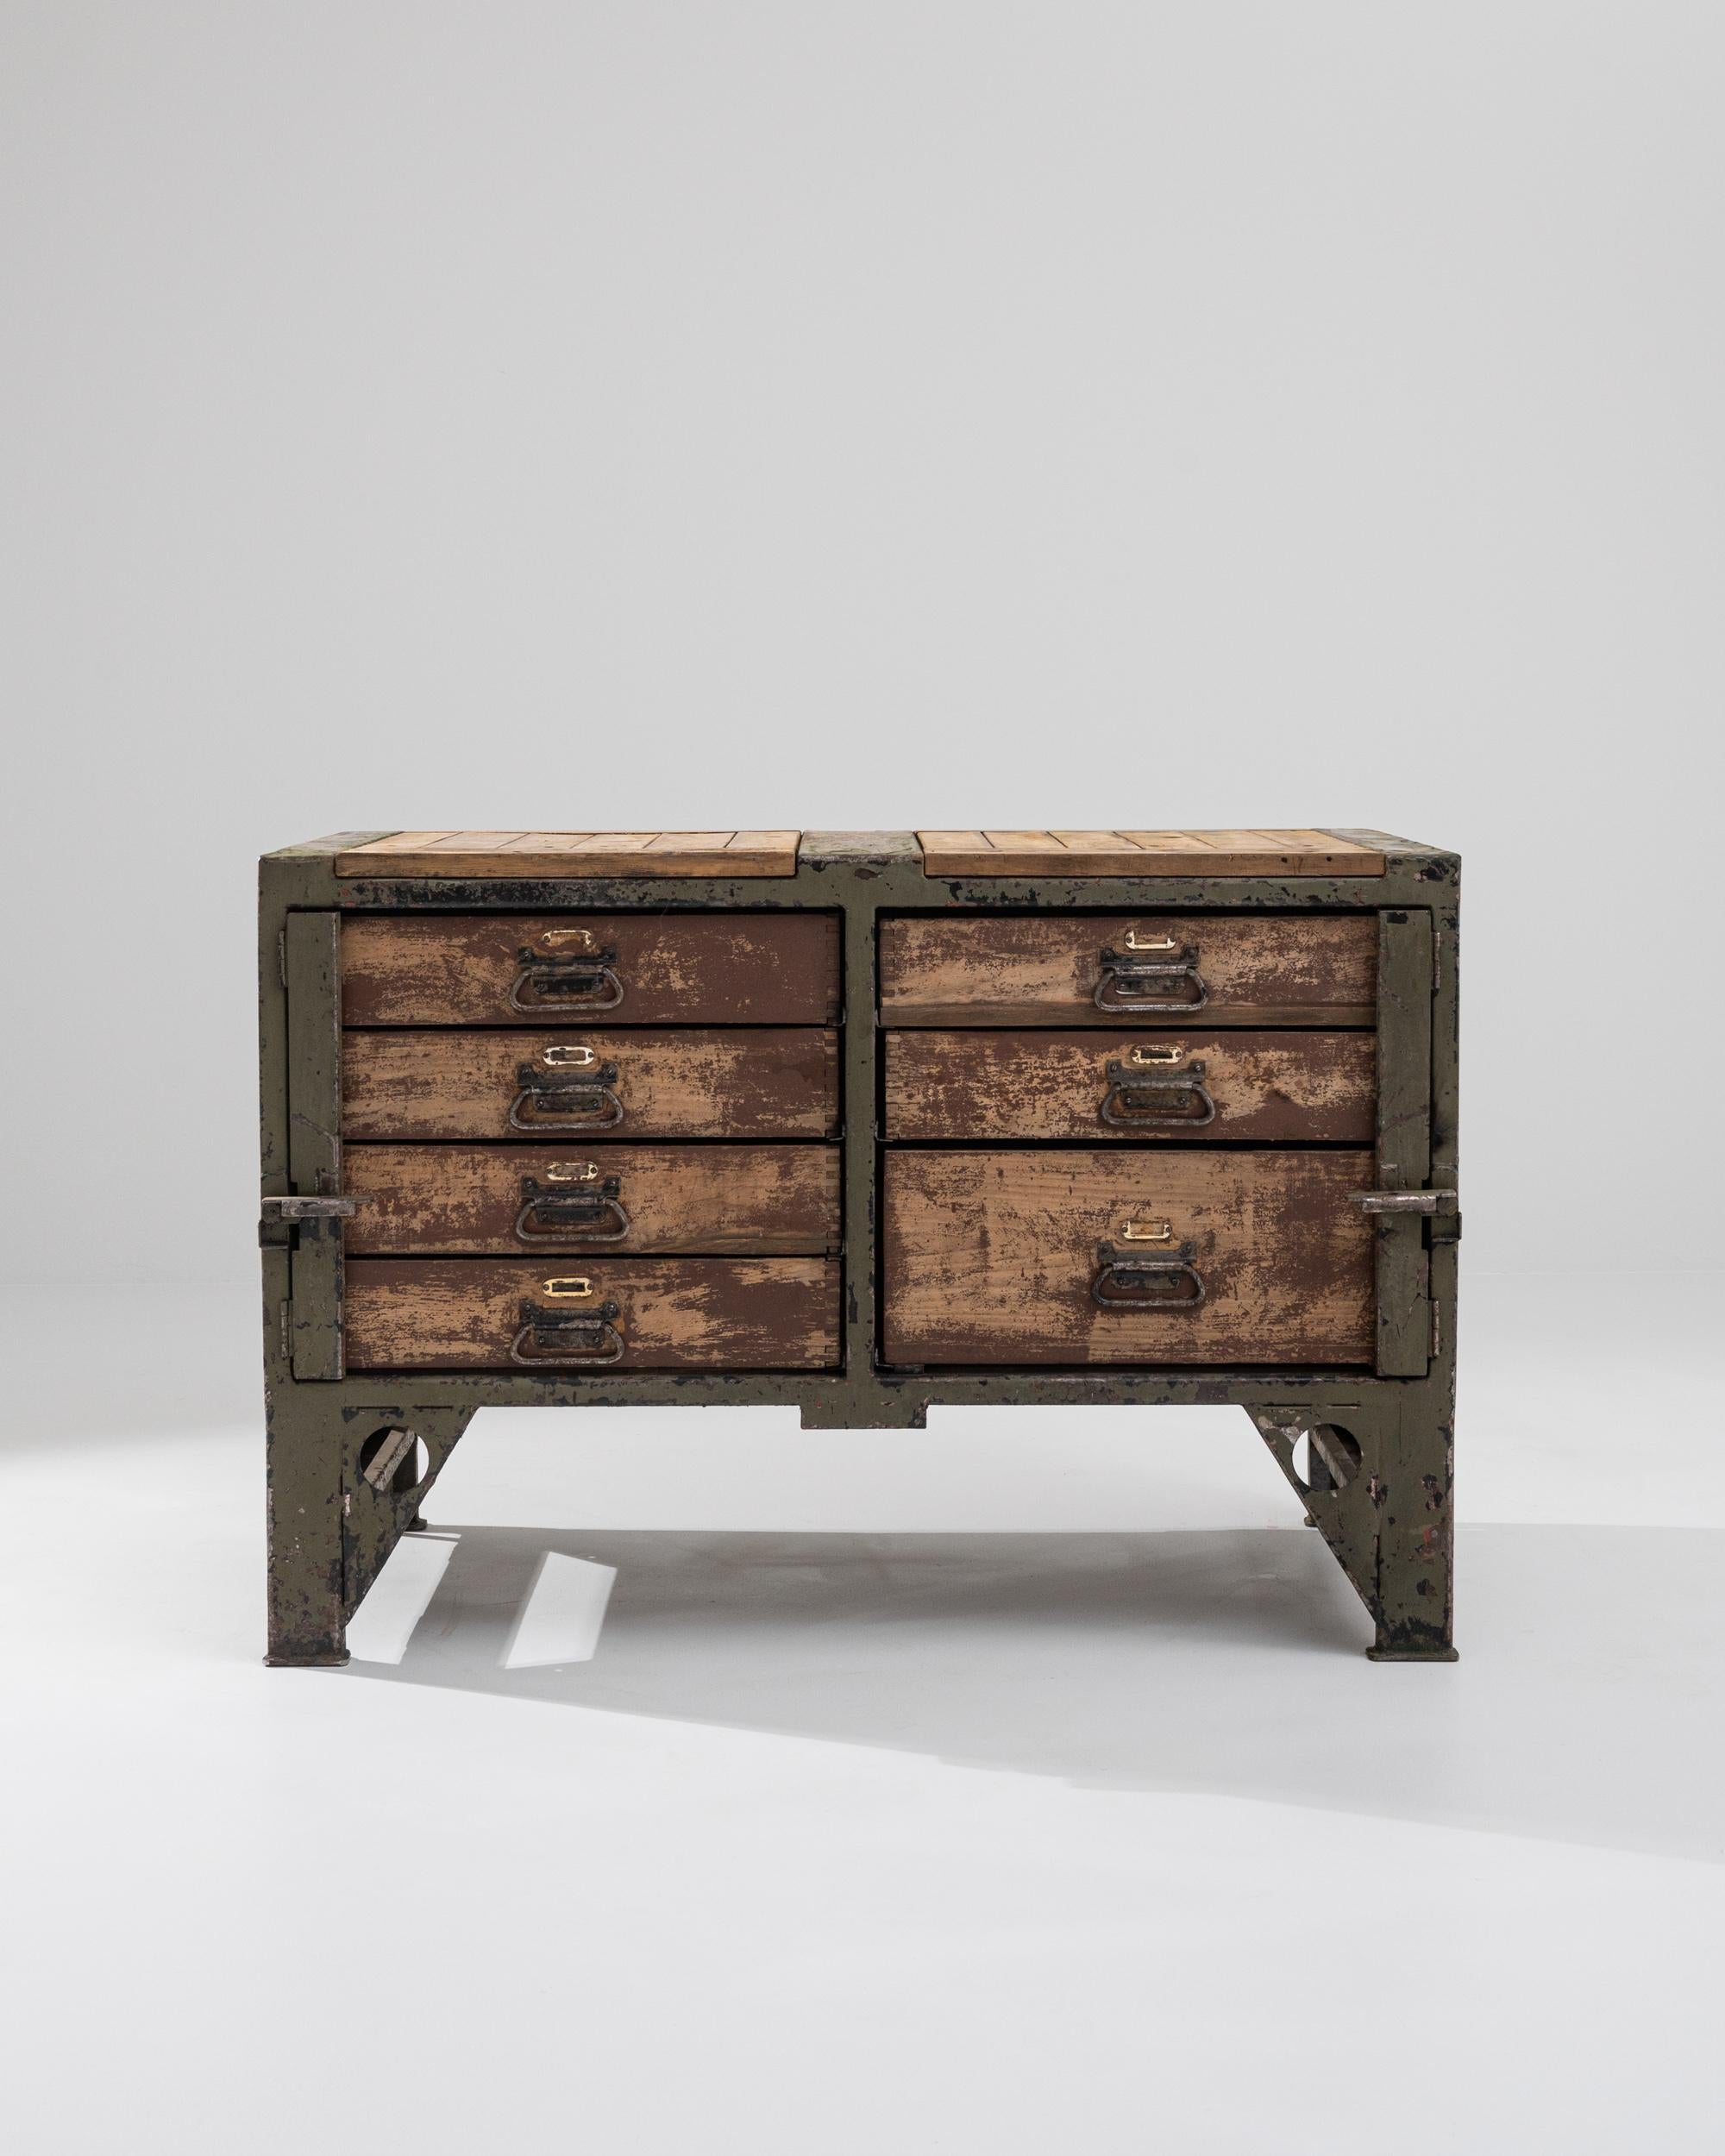 A metal and wooden chest of drawers from 20th century central Europe. Matured, yet compellingly spry, this industrious set of drawers radiates a charming and tidy sensibility. Composed of seven sliding drawers underneath its time-worn work surface,